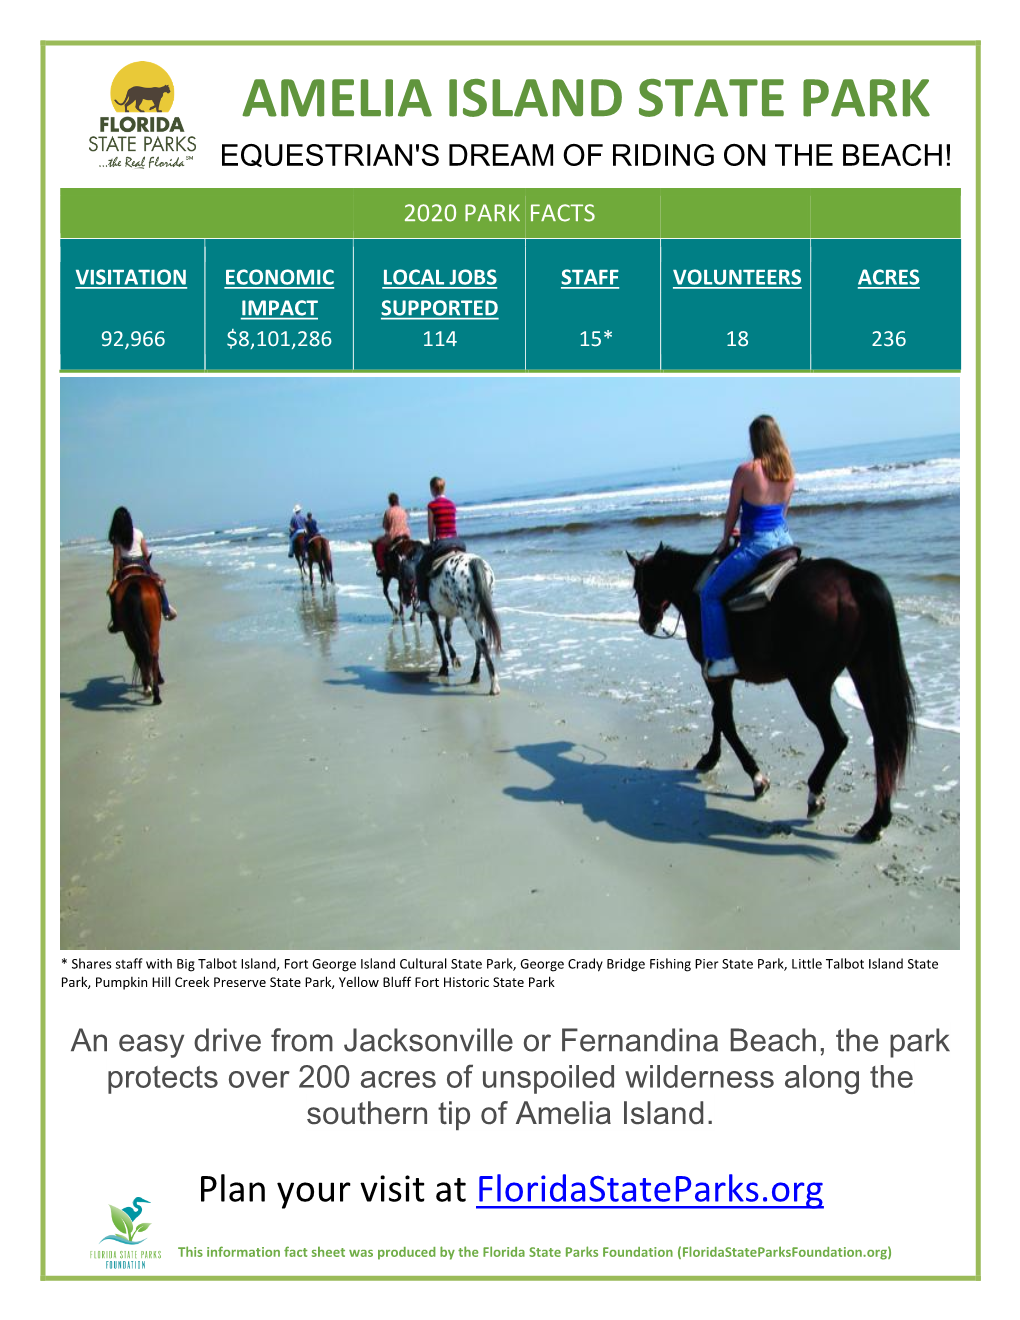 Amelia Island State Park Equestrian's Dream of Riding on the Beach!